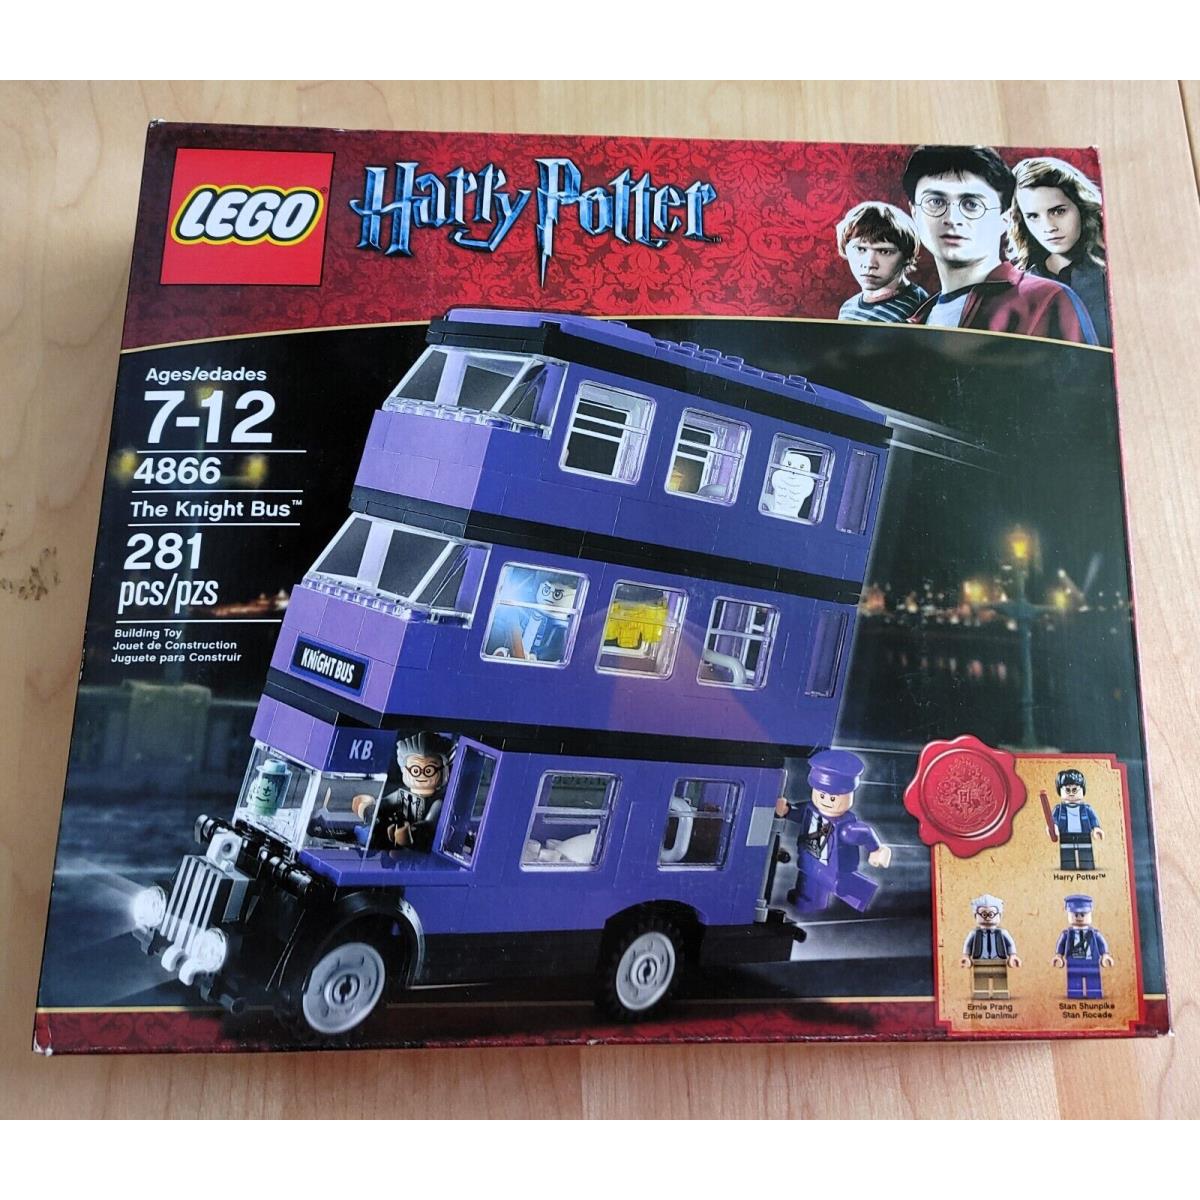 Lego Harry Potter The Knight Bus 4866 VG 2011 Retired